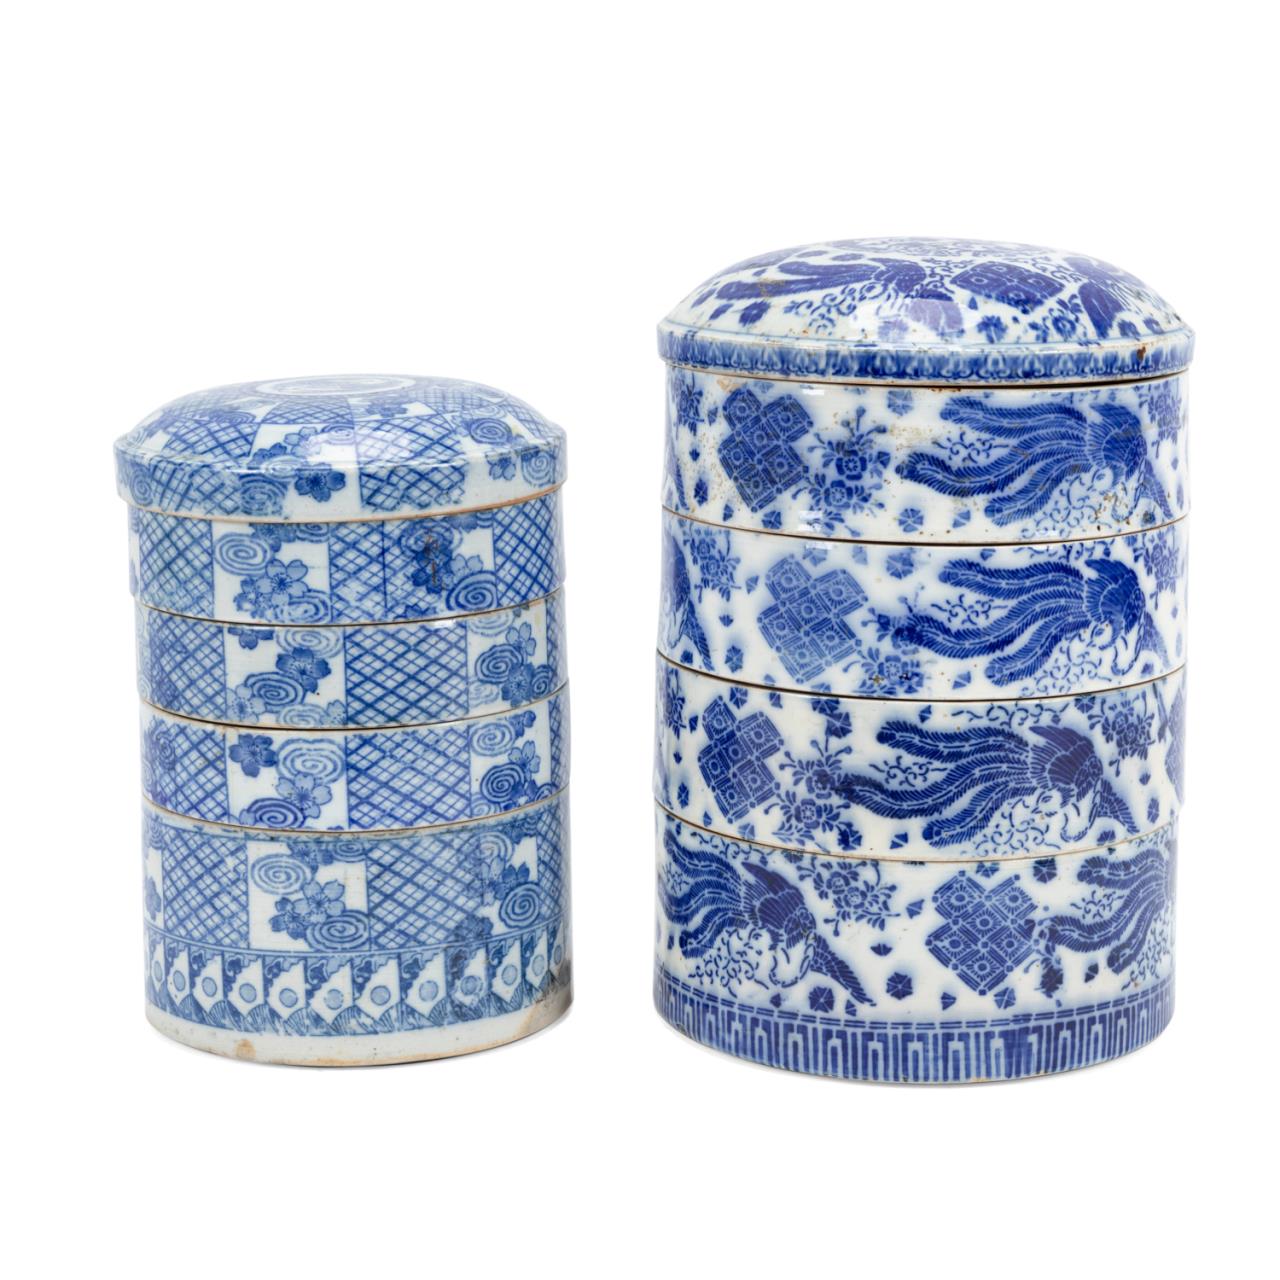 TWO JAPANESE BLUE AND WHITE STACKING 29f535